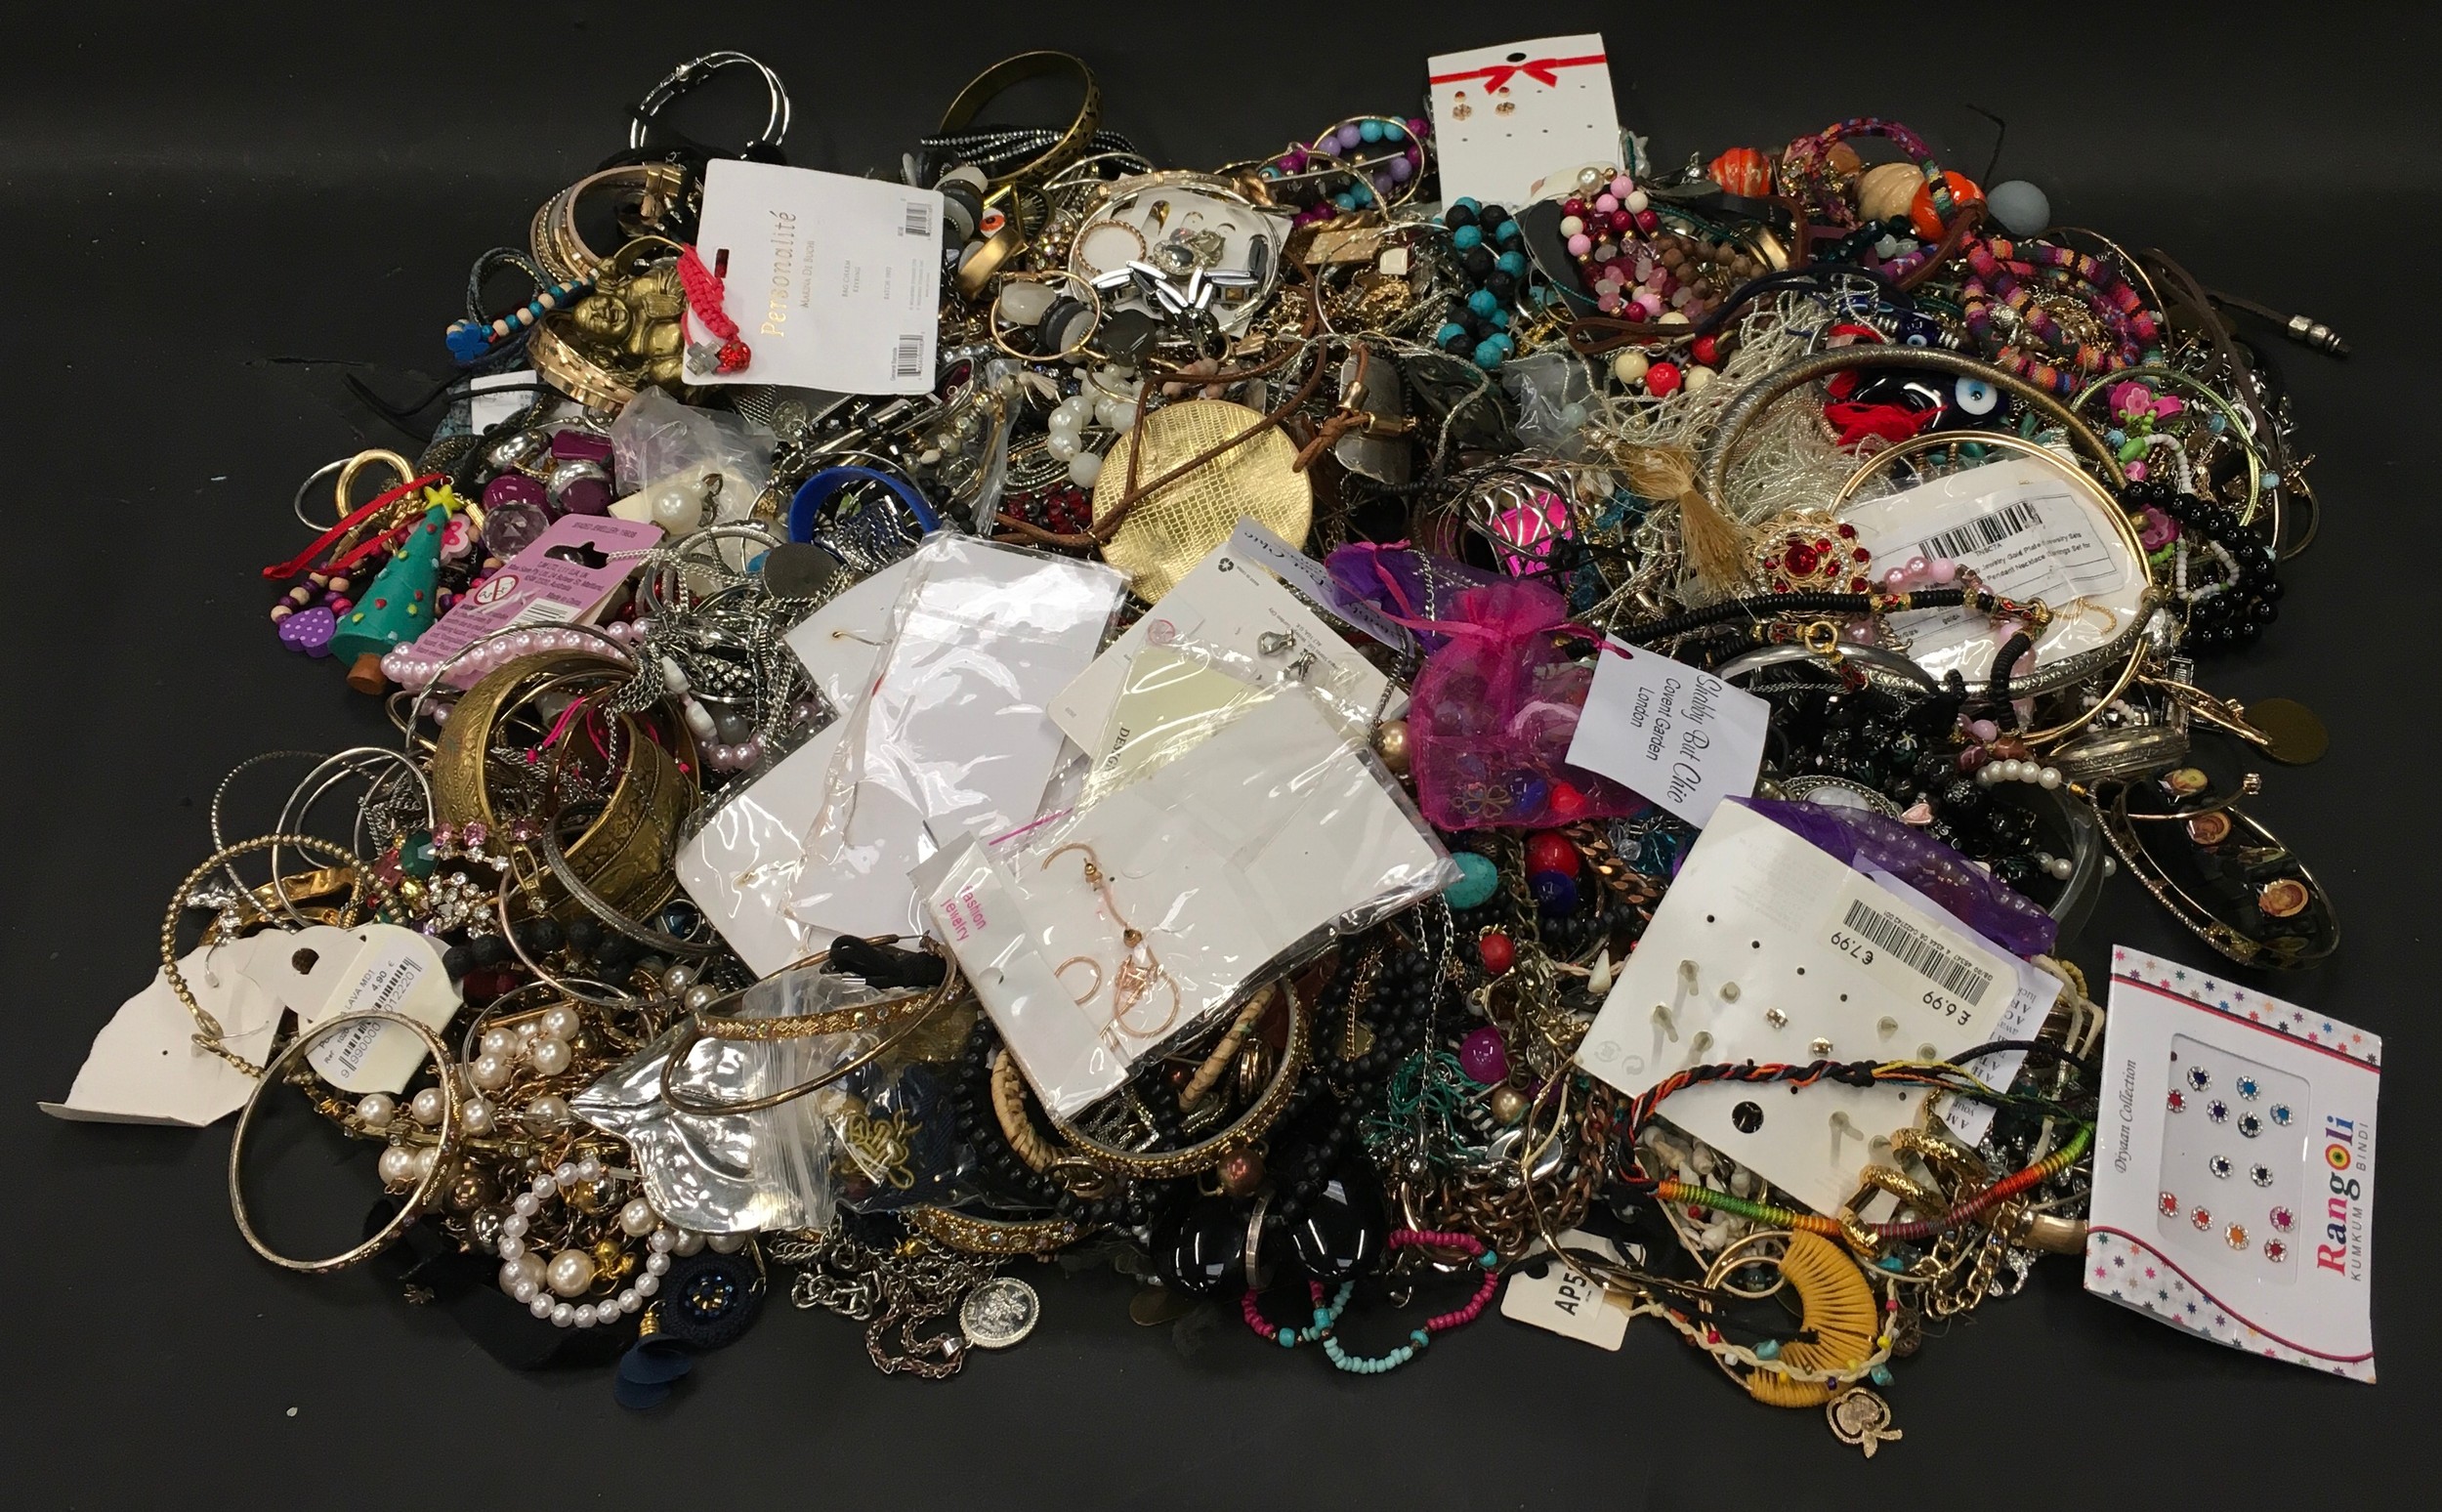 Plastic tub containing a large collection of costume jewellery.